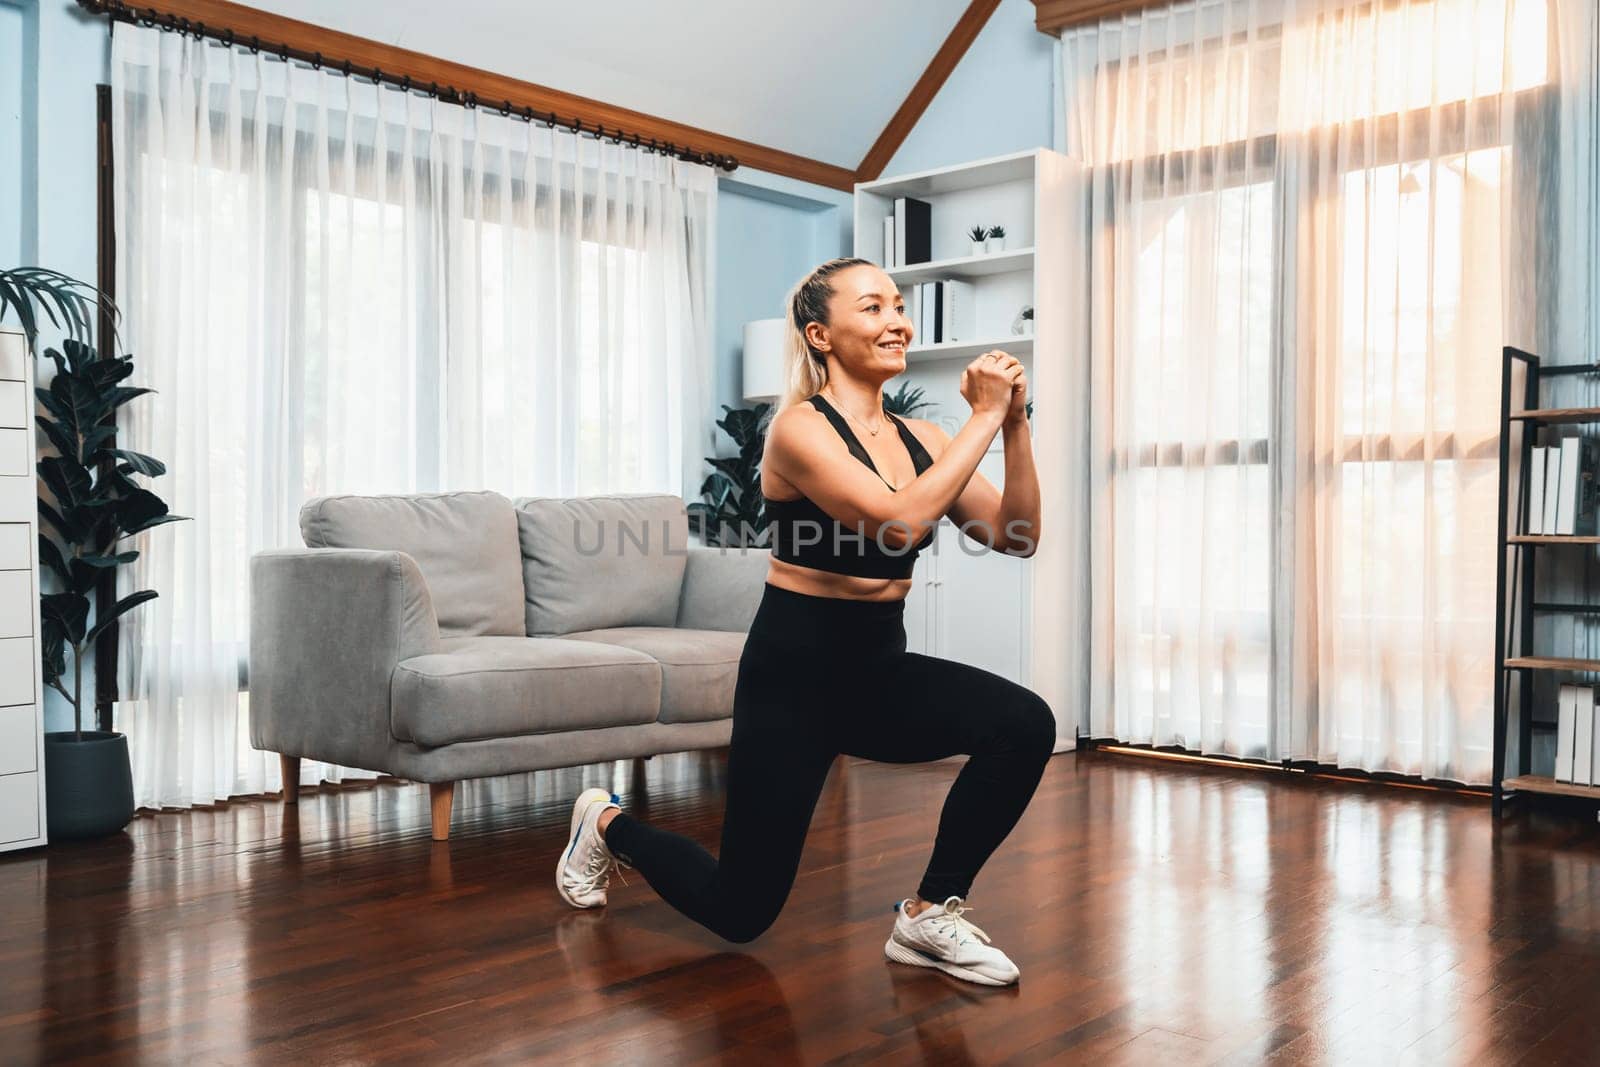 Active and fit senior woman warmup and stretching before home exercising routine at living room. Healthy fitness lifestyle concept after retirement for pensioner. Clout